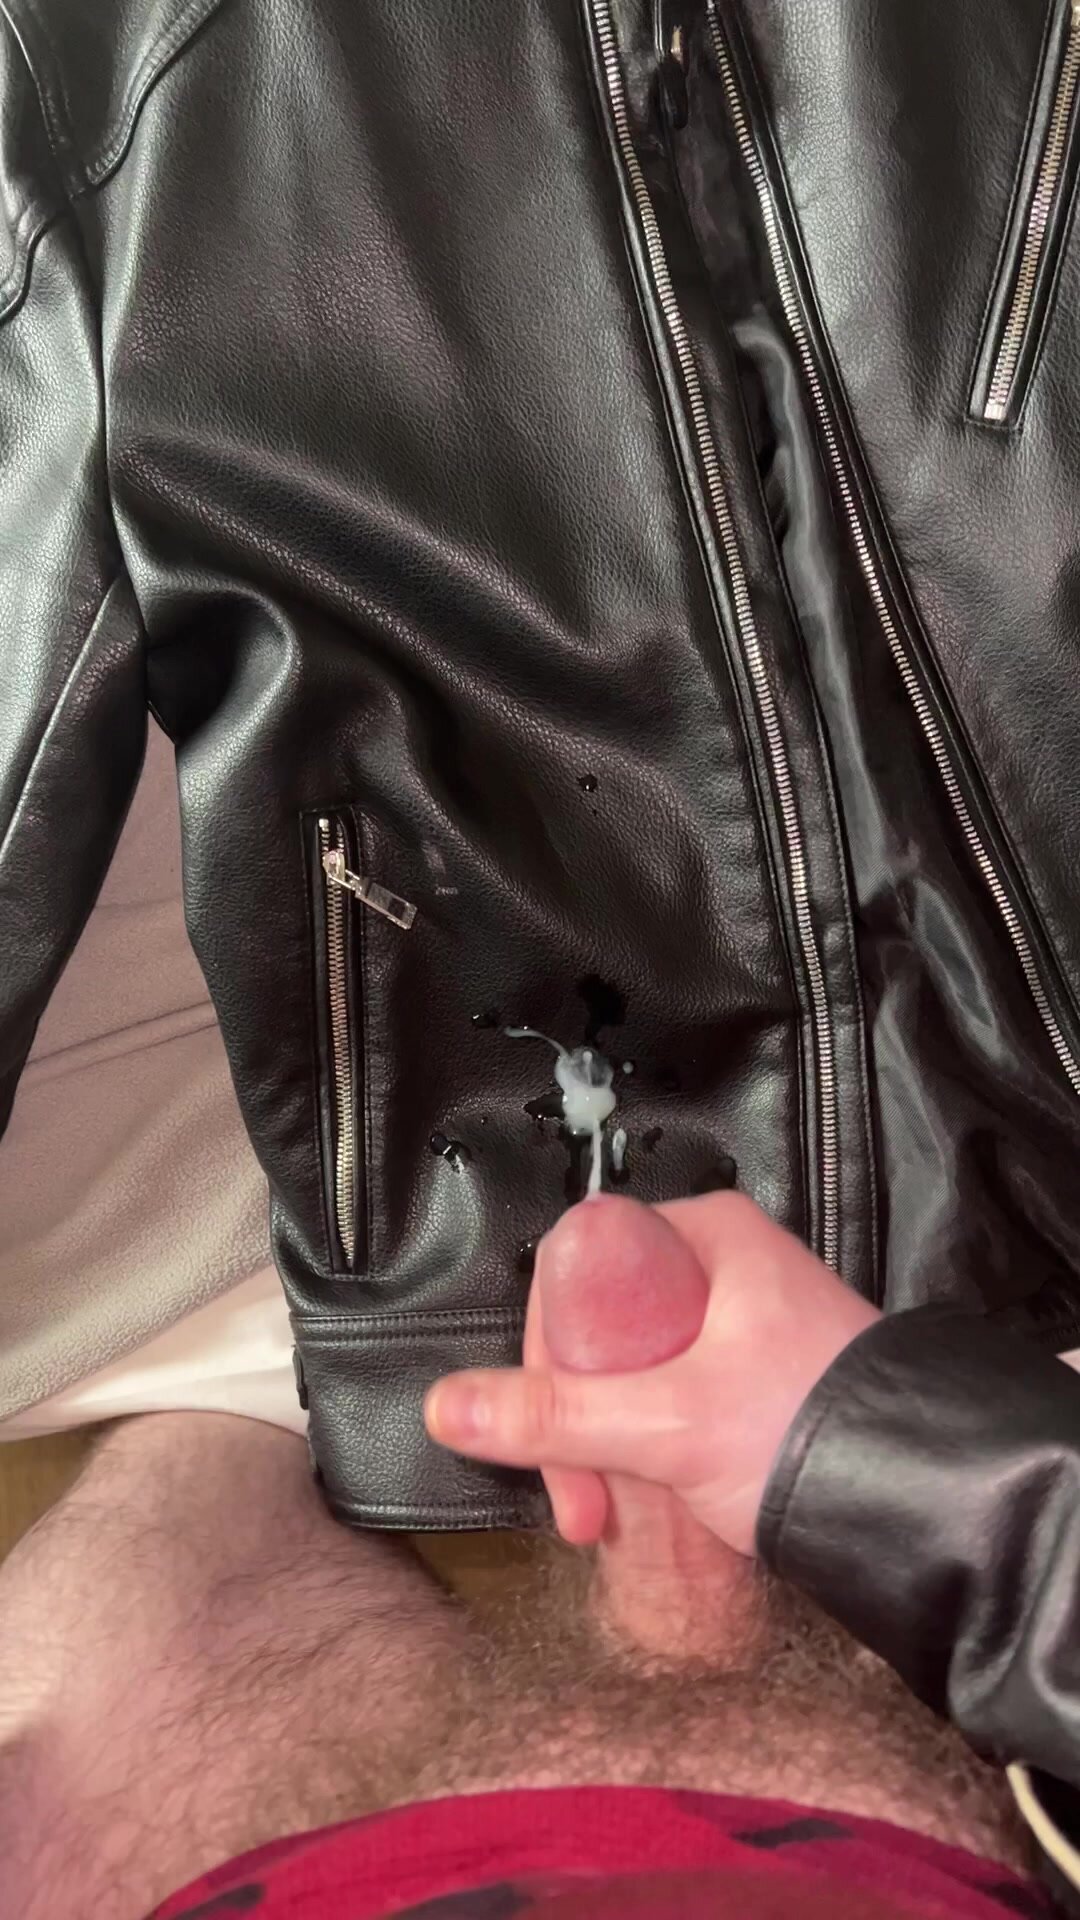 Cumming on a leather jacket